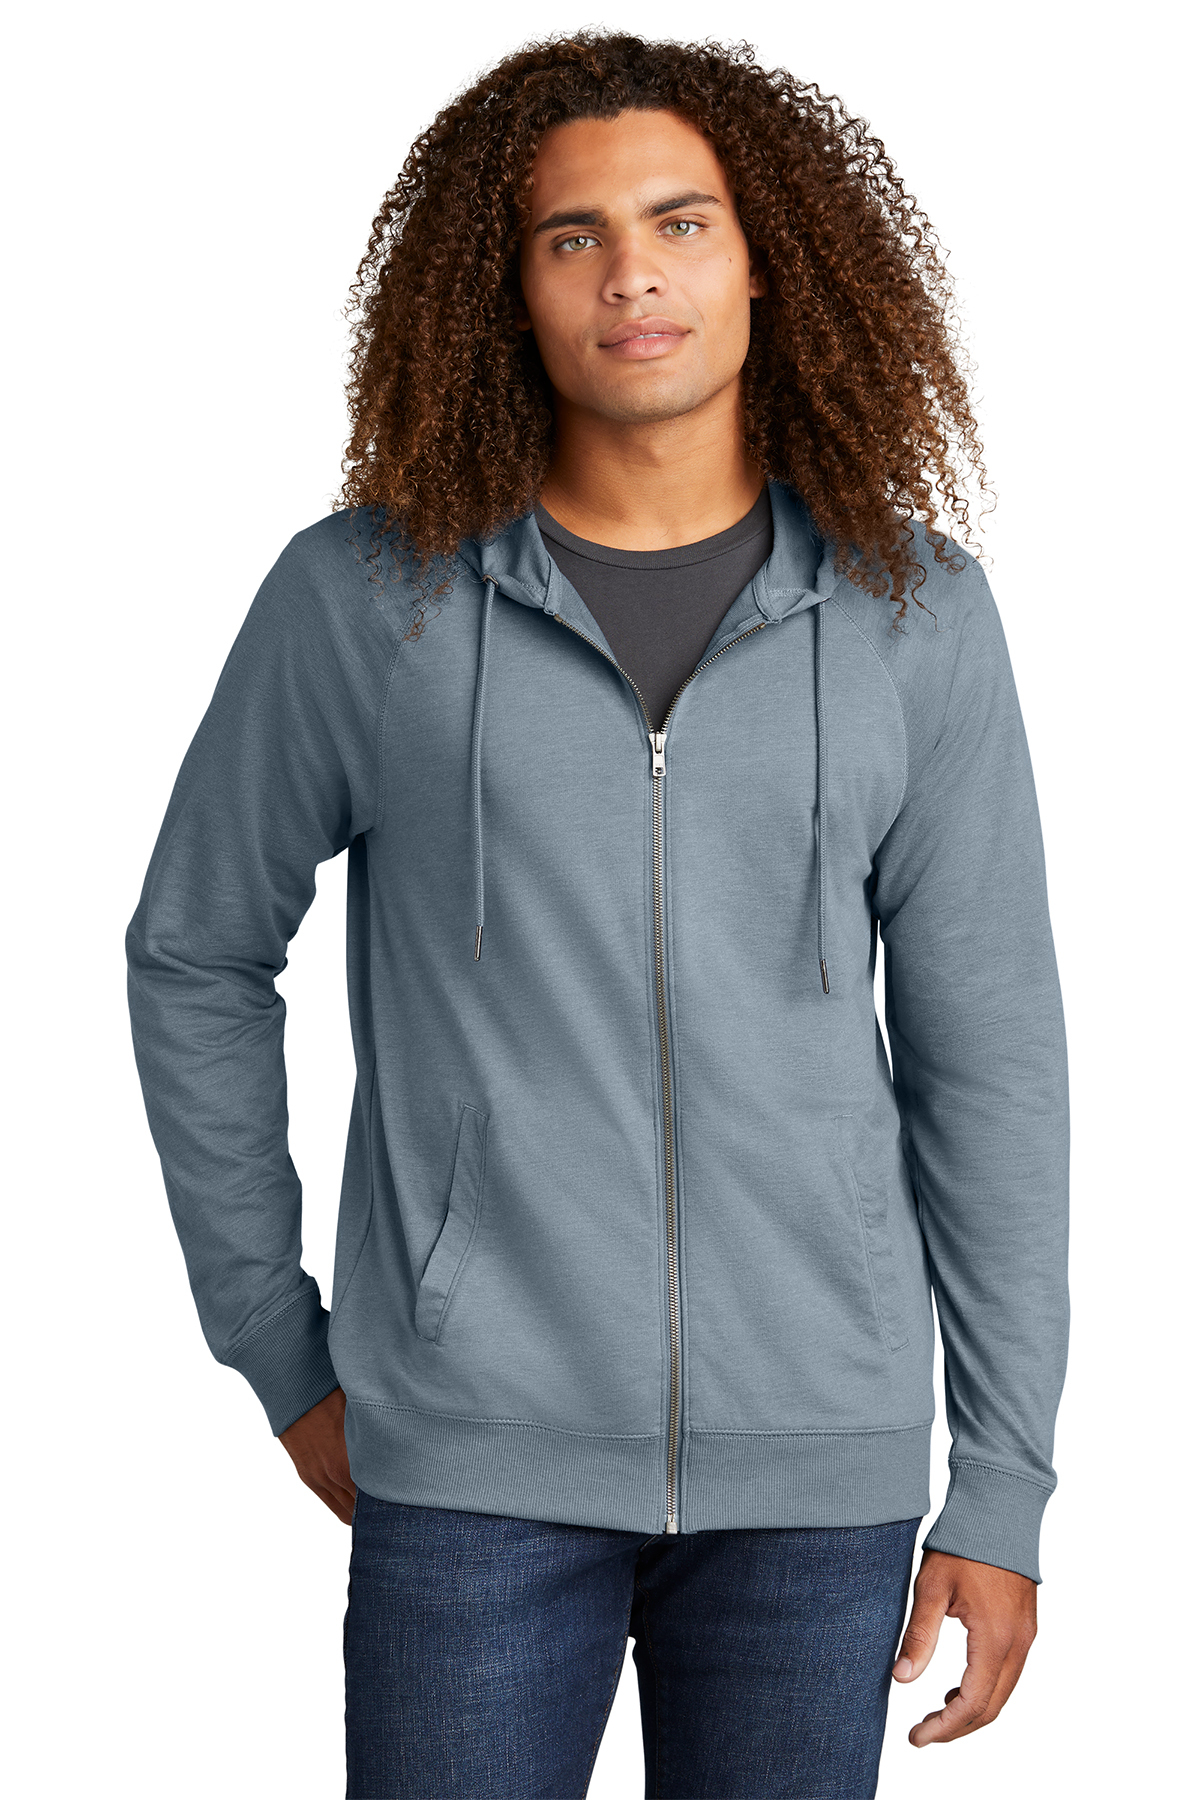 Hanes Zip Hoodie - French Terry